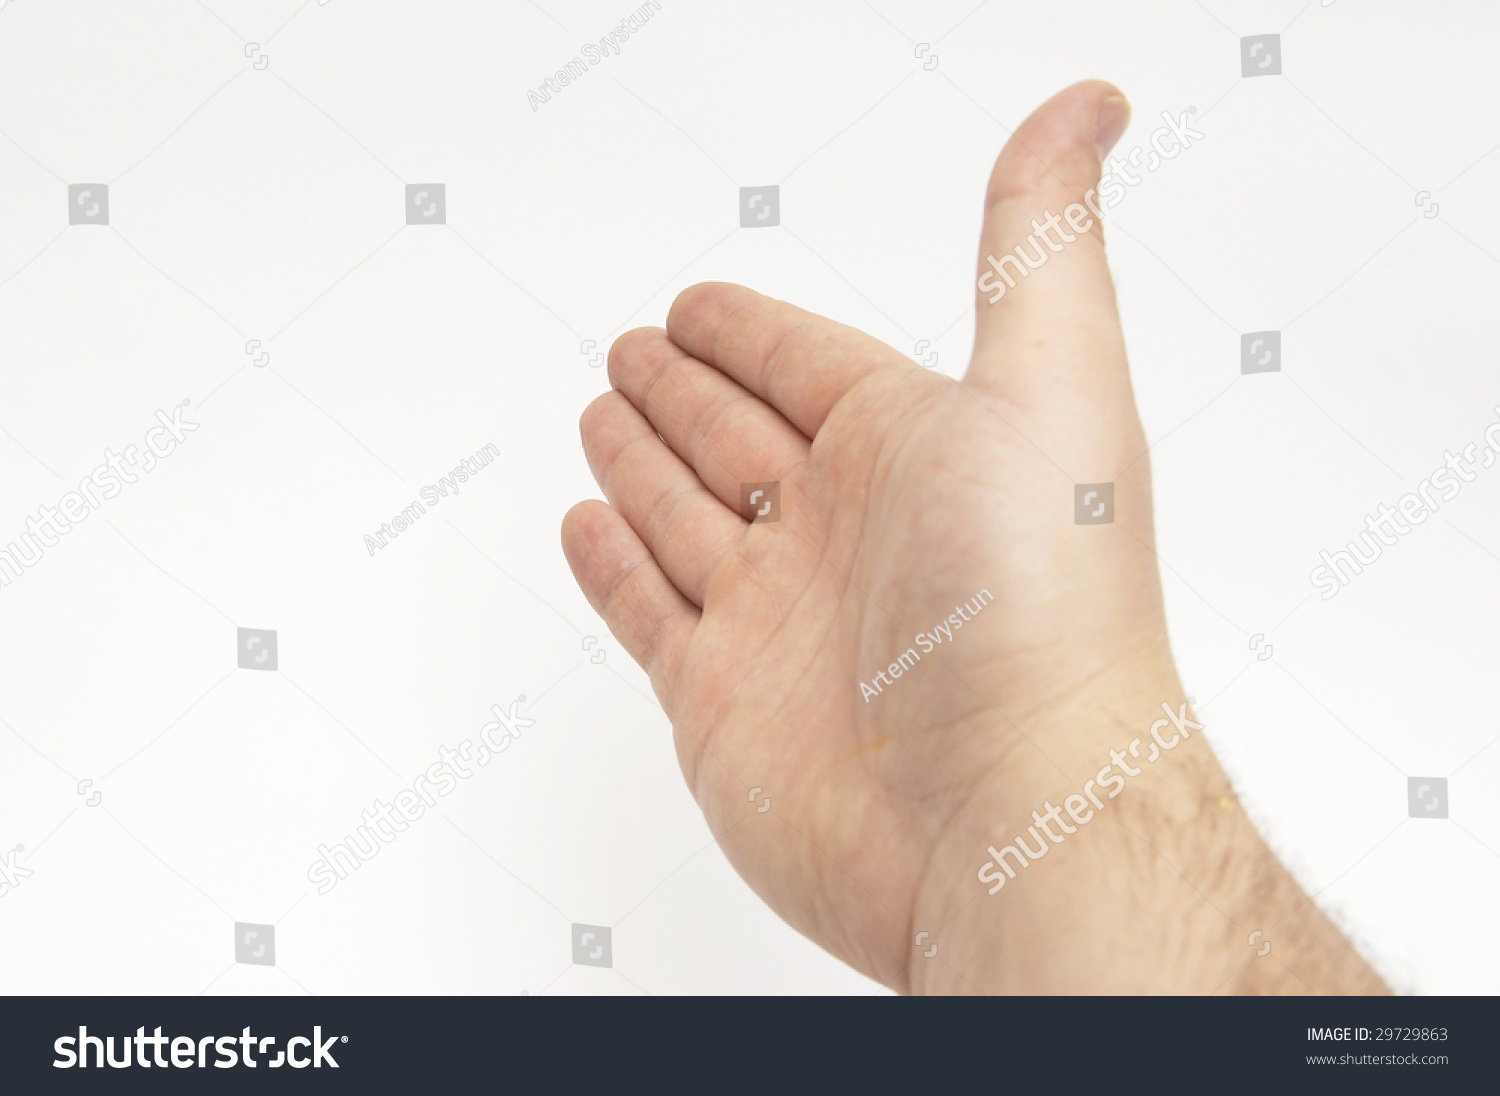 Open Palm Of The Right Hand Stock Photo 29729863 : Shutterstock